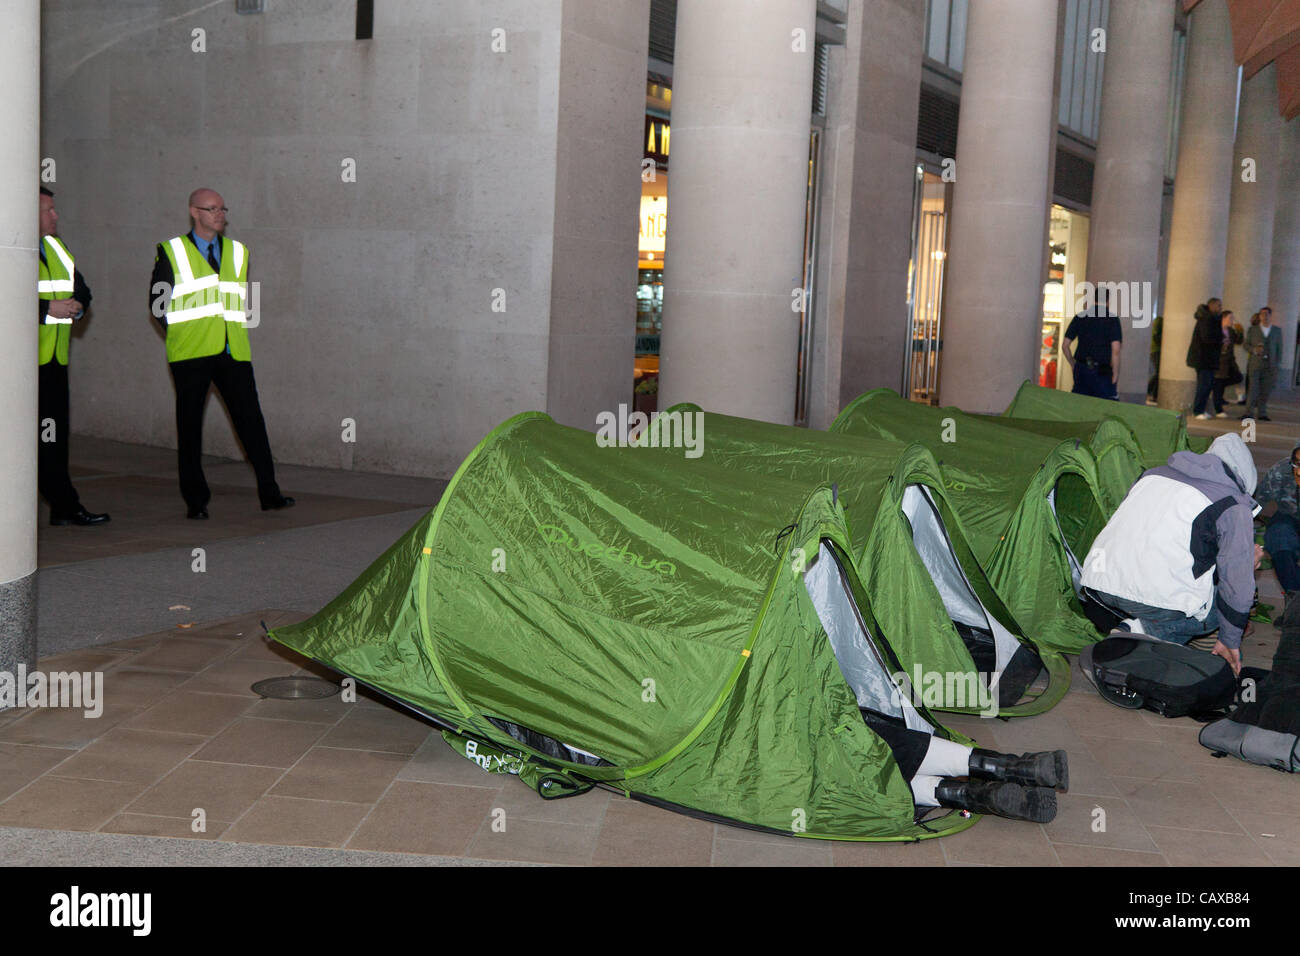 London, UK. 1st May 2012 Tents and banners were erected in front of the main entrance to the London Stock Exchange inside Paternoster square by members of the occupy movement. Police managed to convince the majority of people to leave the square around 22.30 and 5 arrests were. Stock Photo